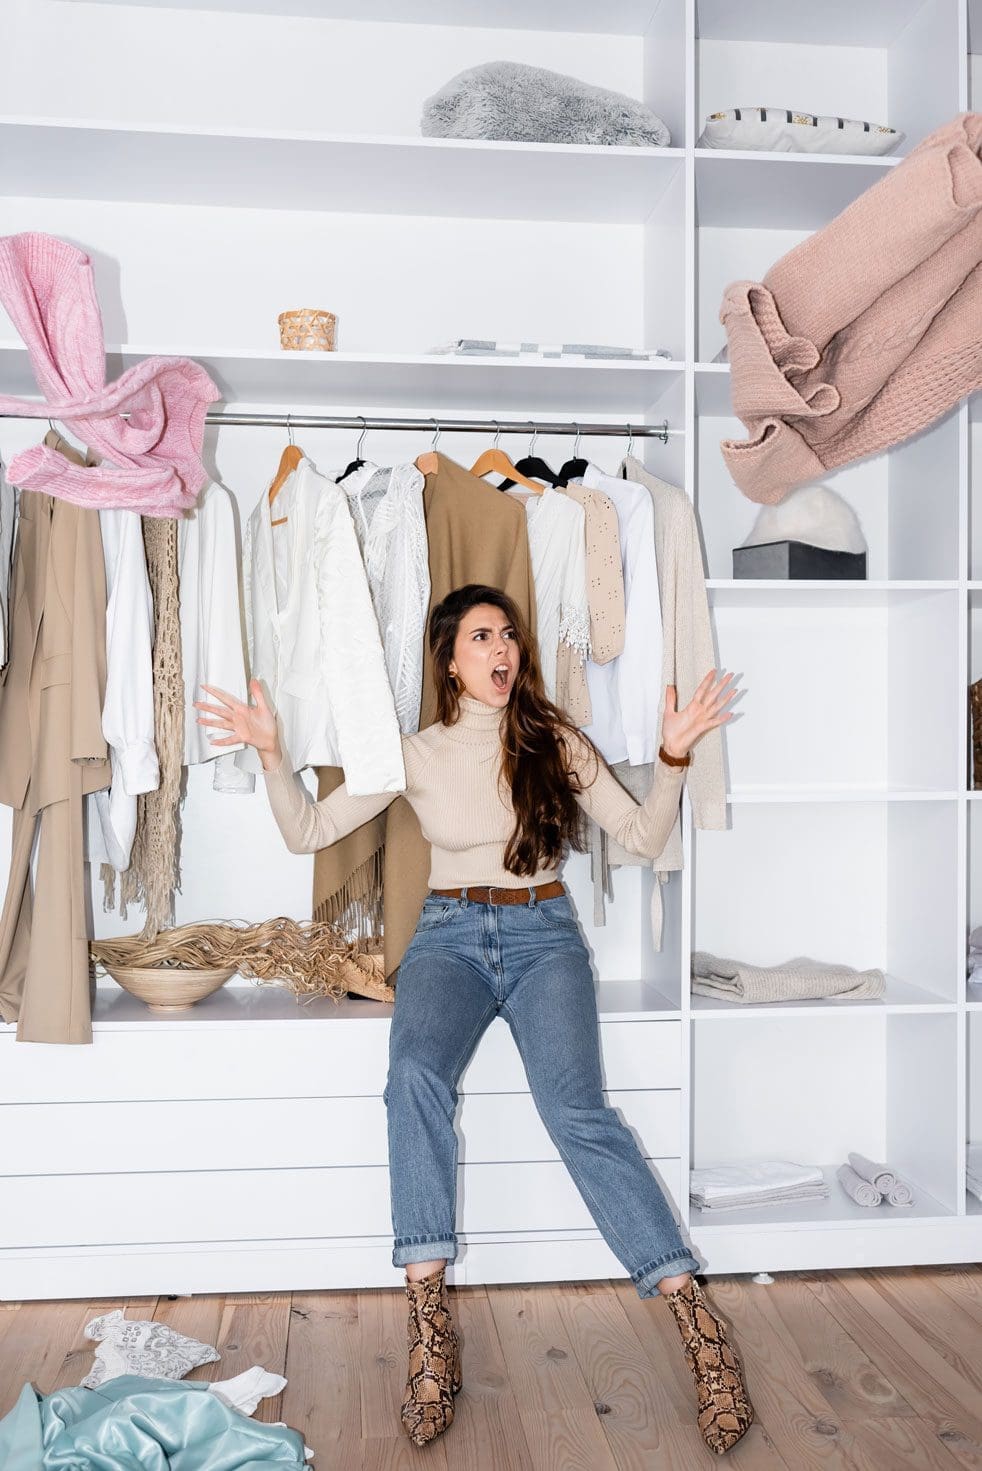 20 tips to help you shop smarter and buy clothes you want to wear